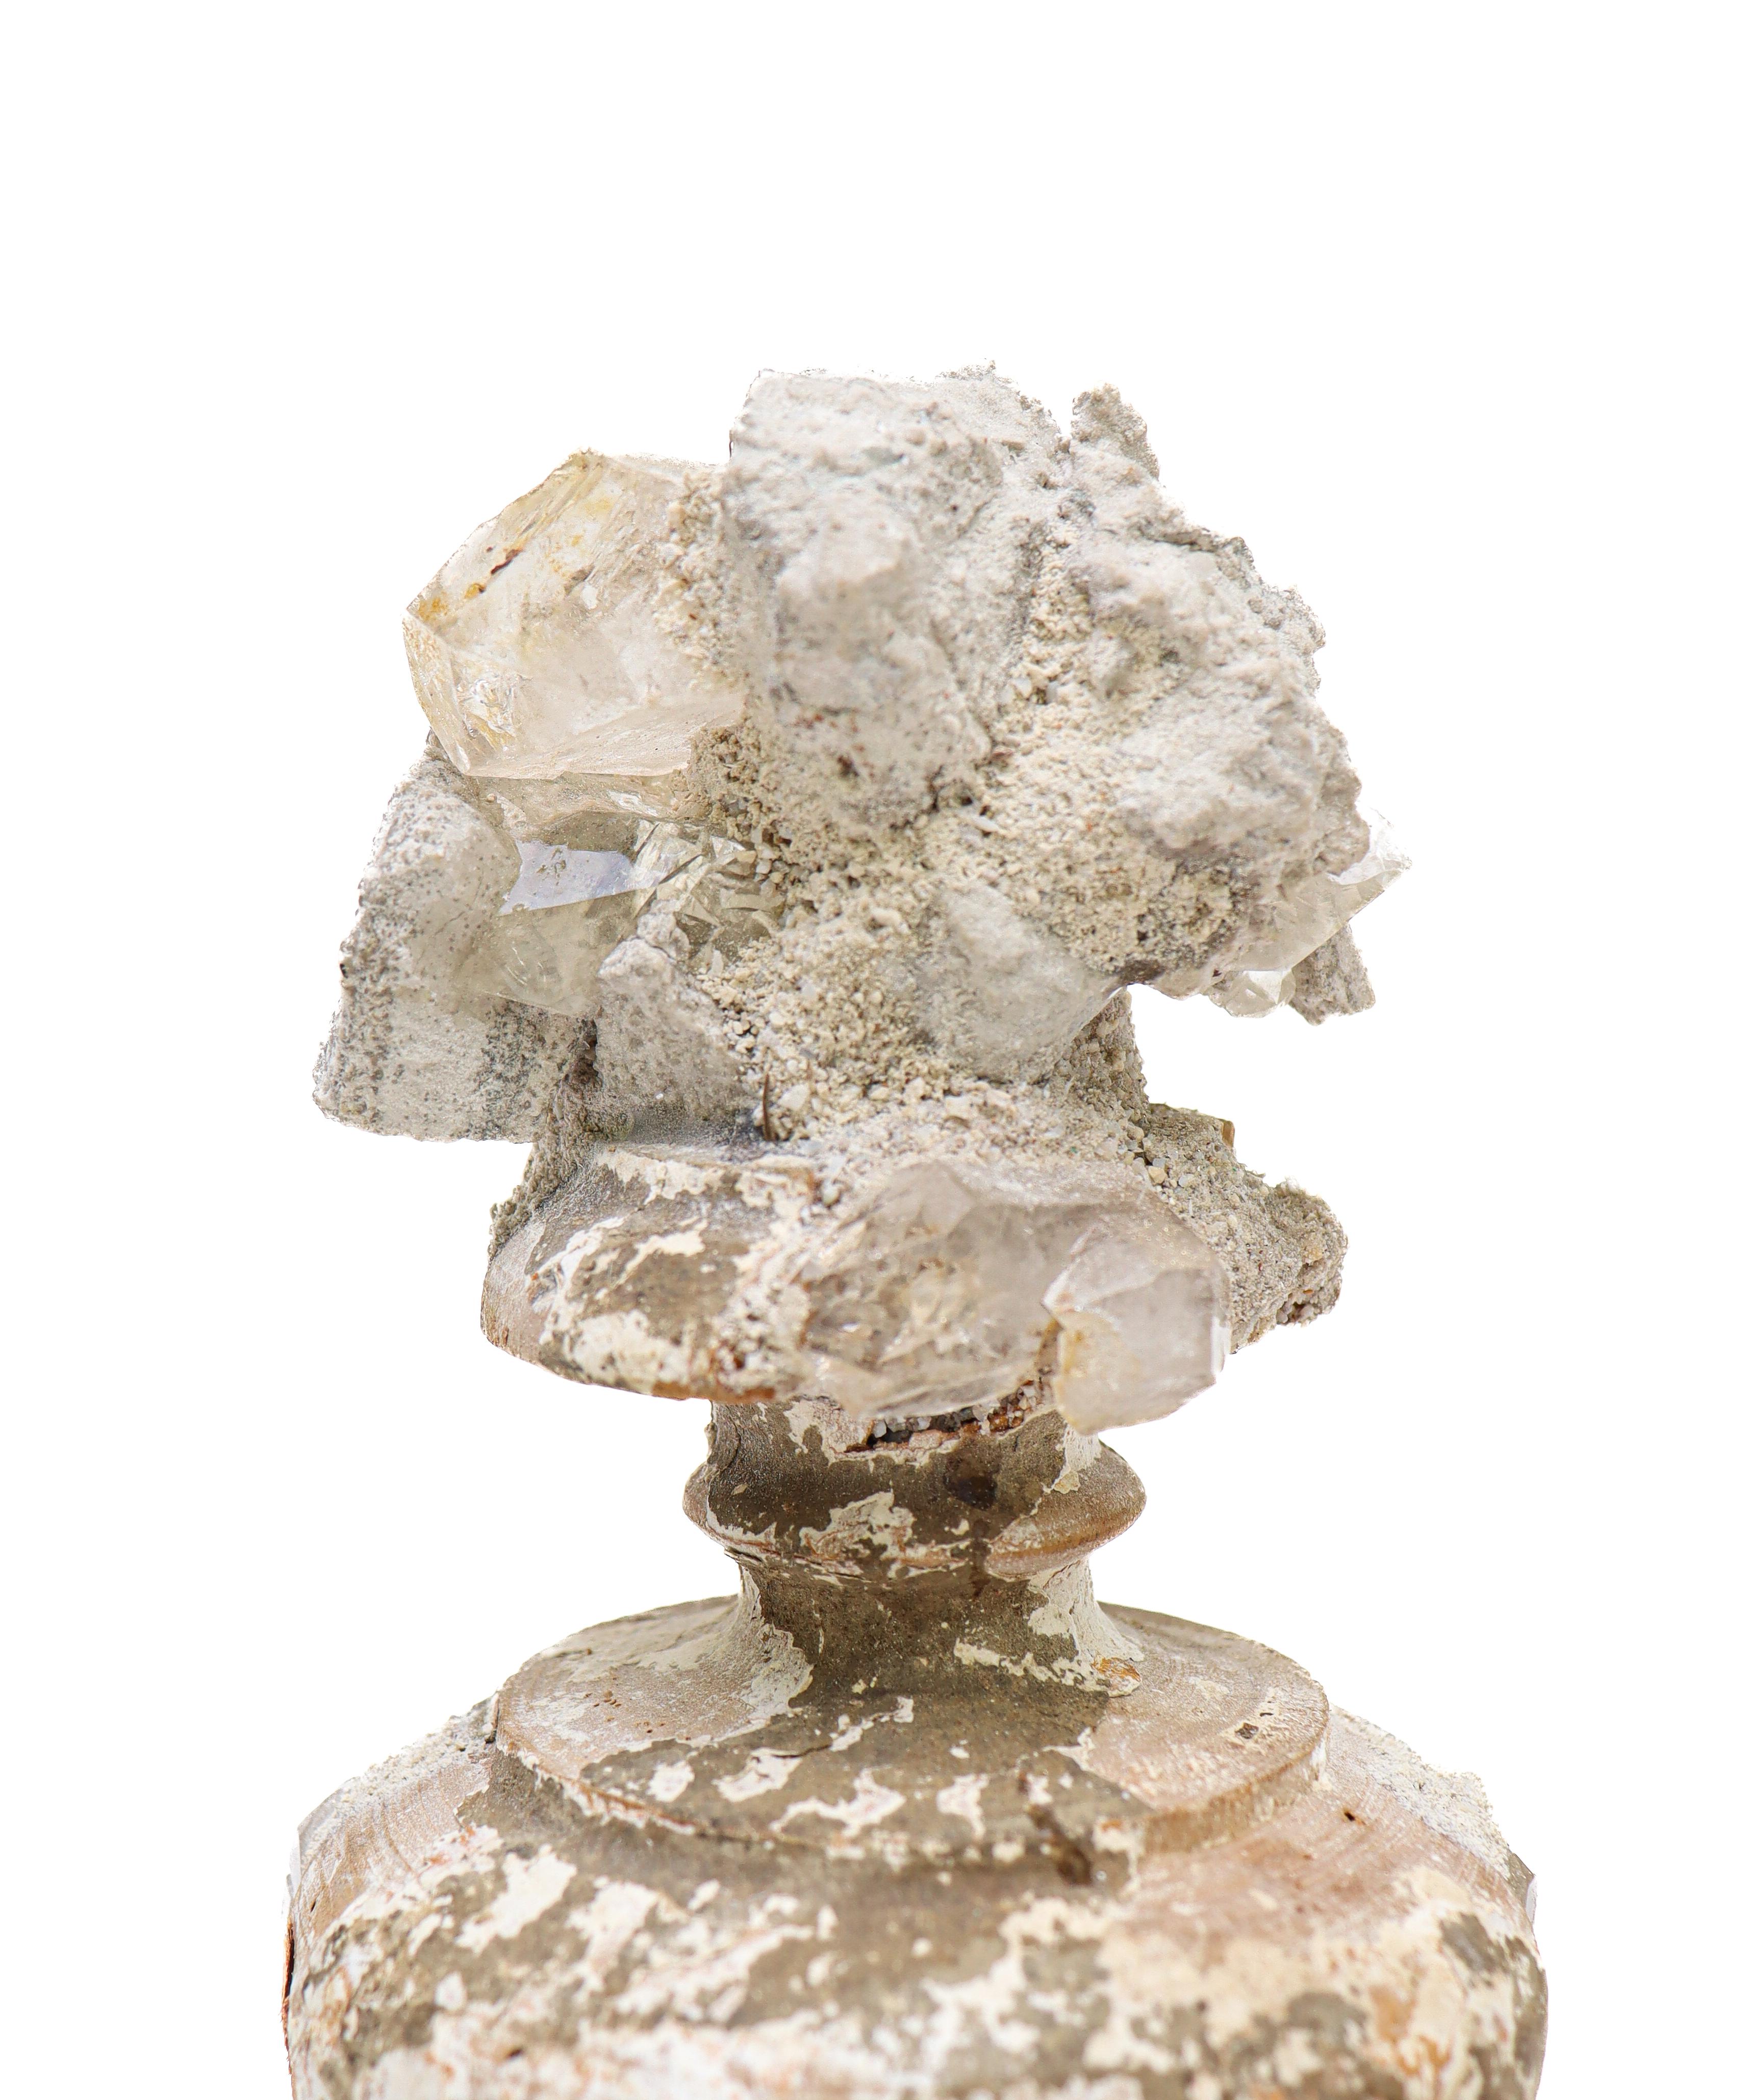 17th Century Italian Fragments 'Group of Three' with Calcite Crystals on Bobeche 2